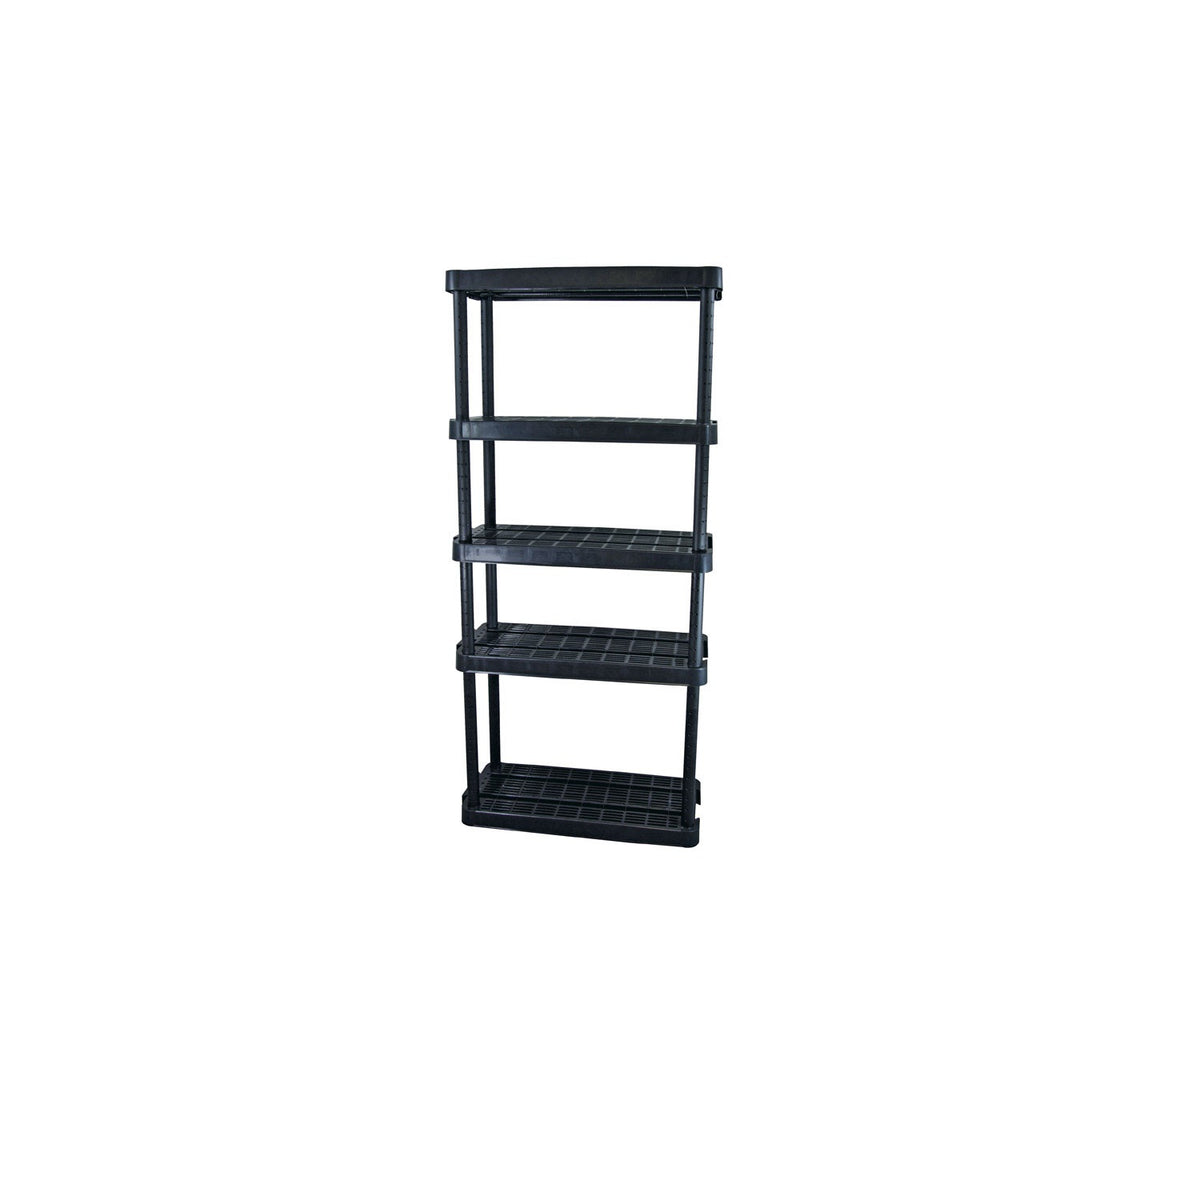 buy standing shelf units at cheap rate in bulk. wholesale & retail storage & organizer baskets store.